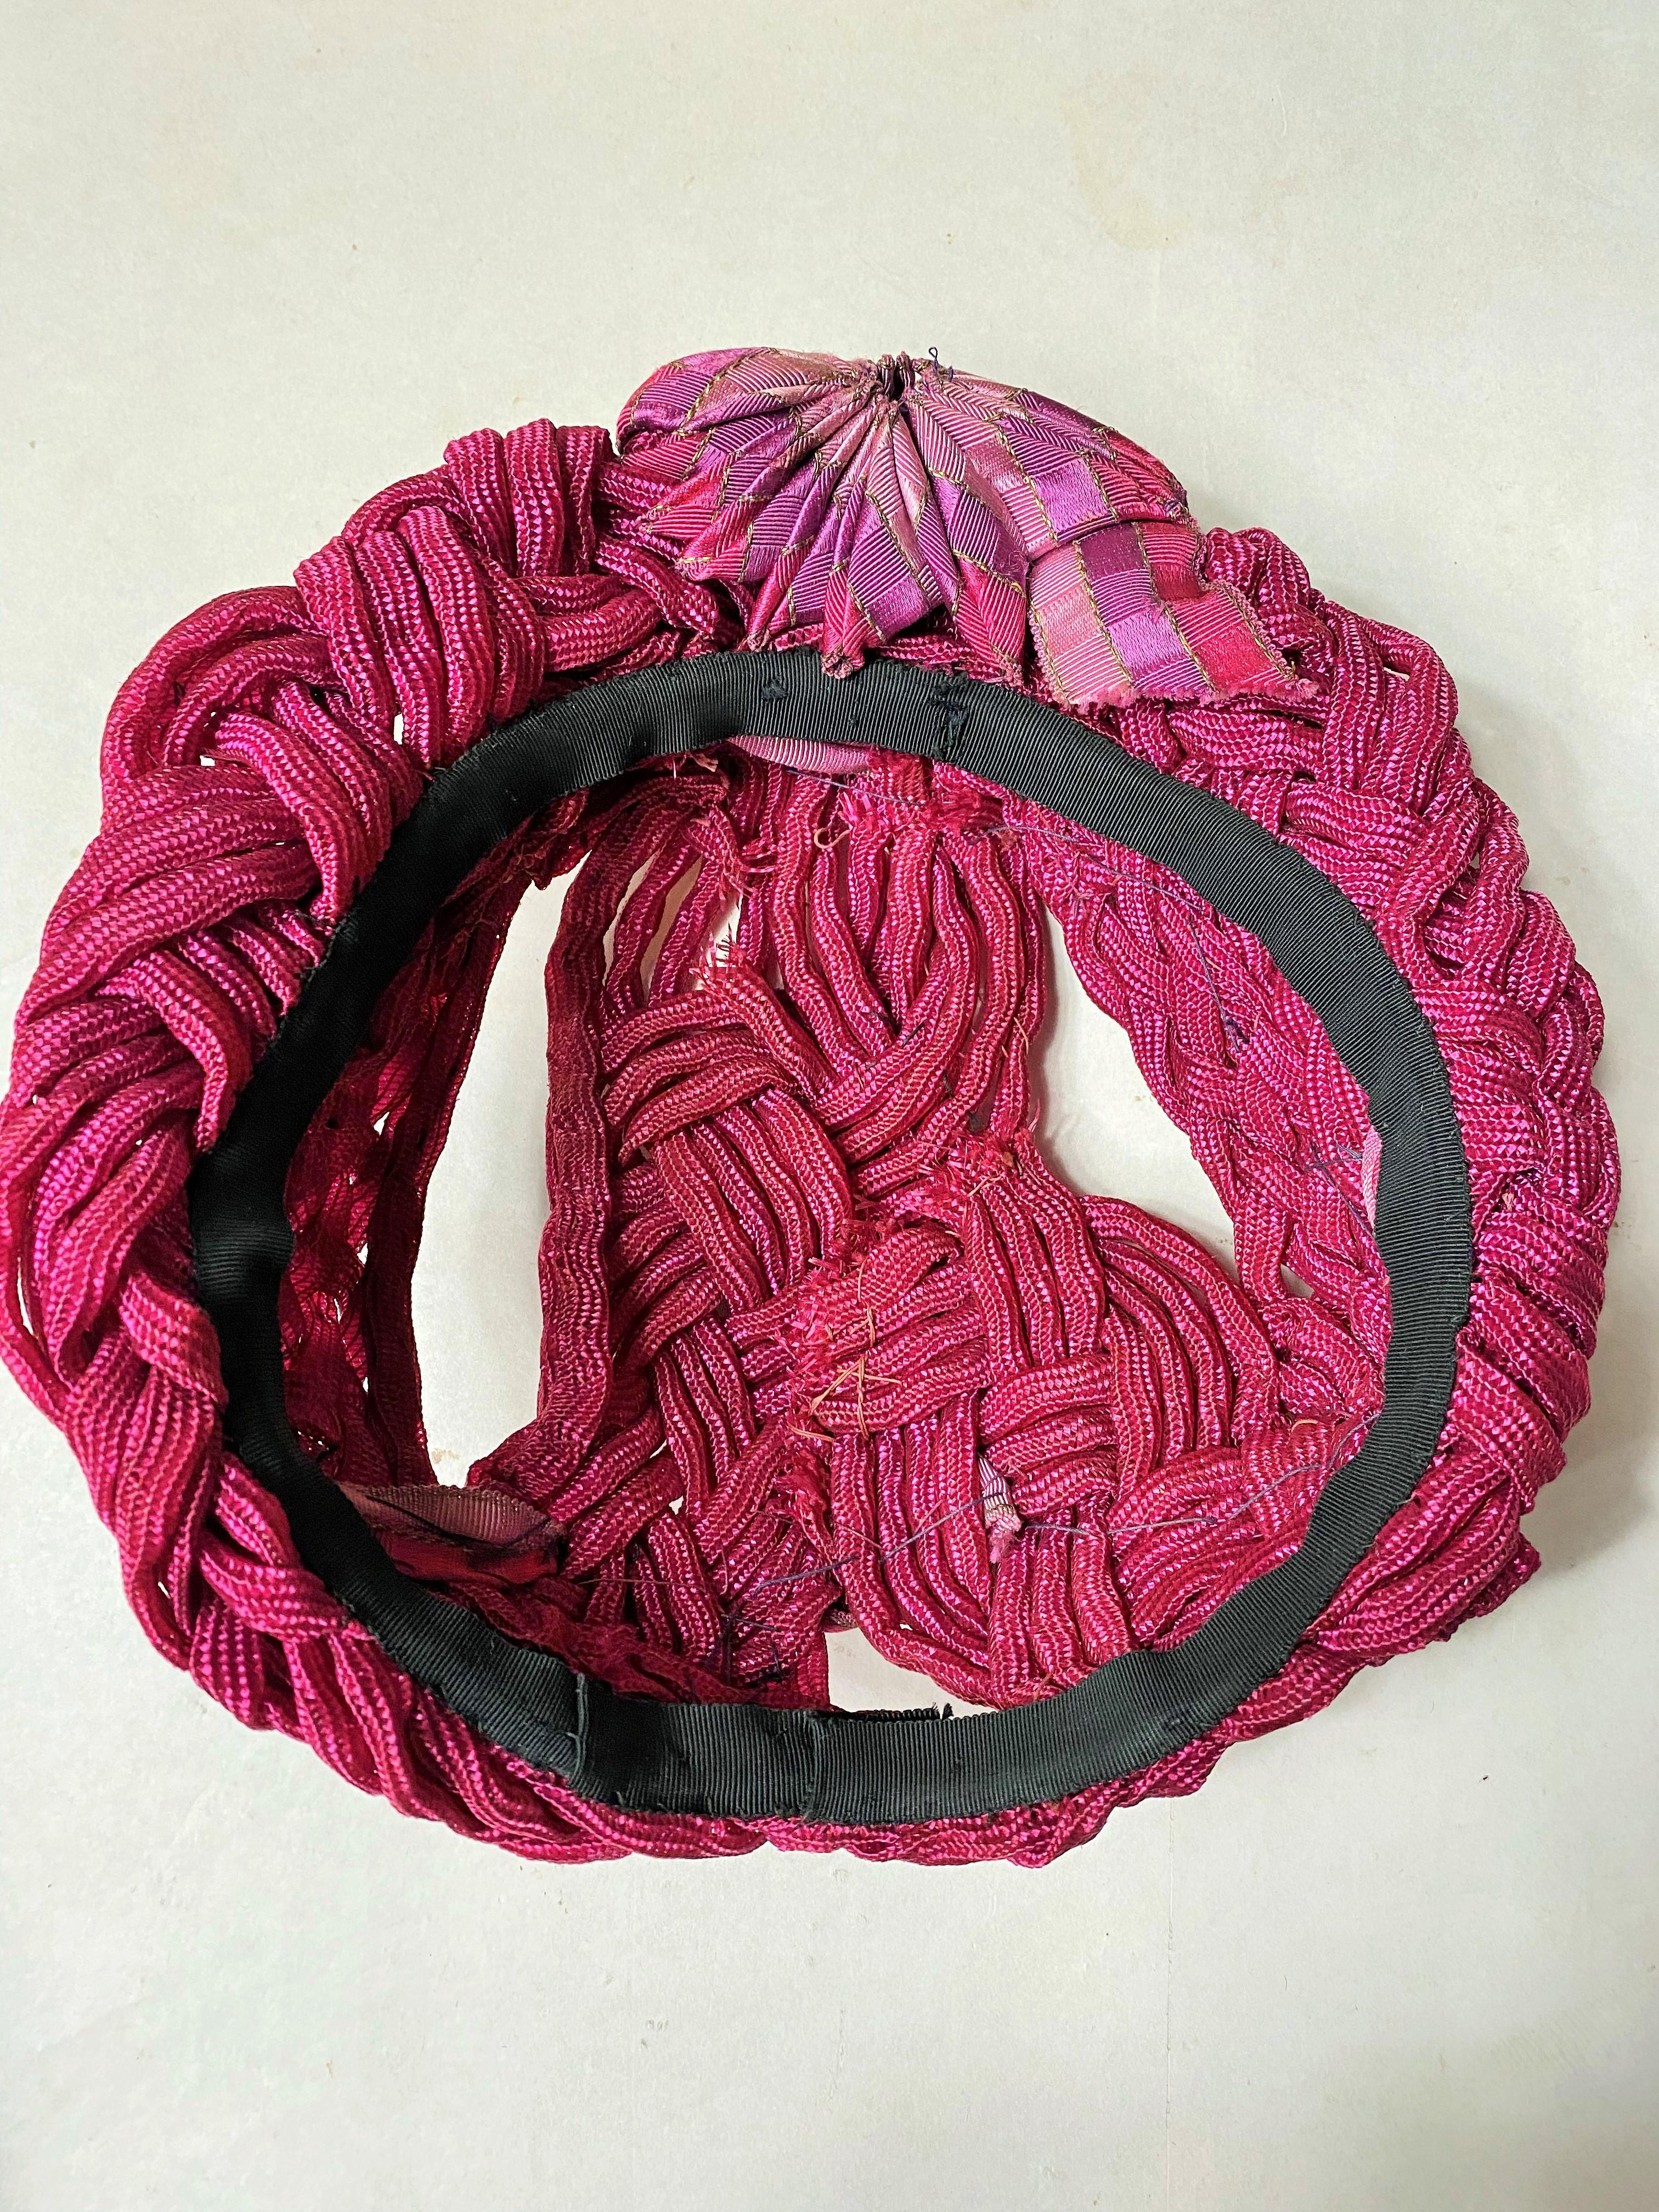 A Pink Rafia and Celluloid Braid Bibi Hat - France Circa 1940-1945 In Good Condition For Sale In Toulon, FR